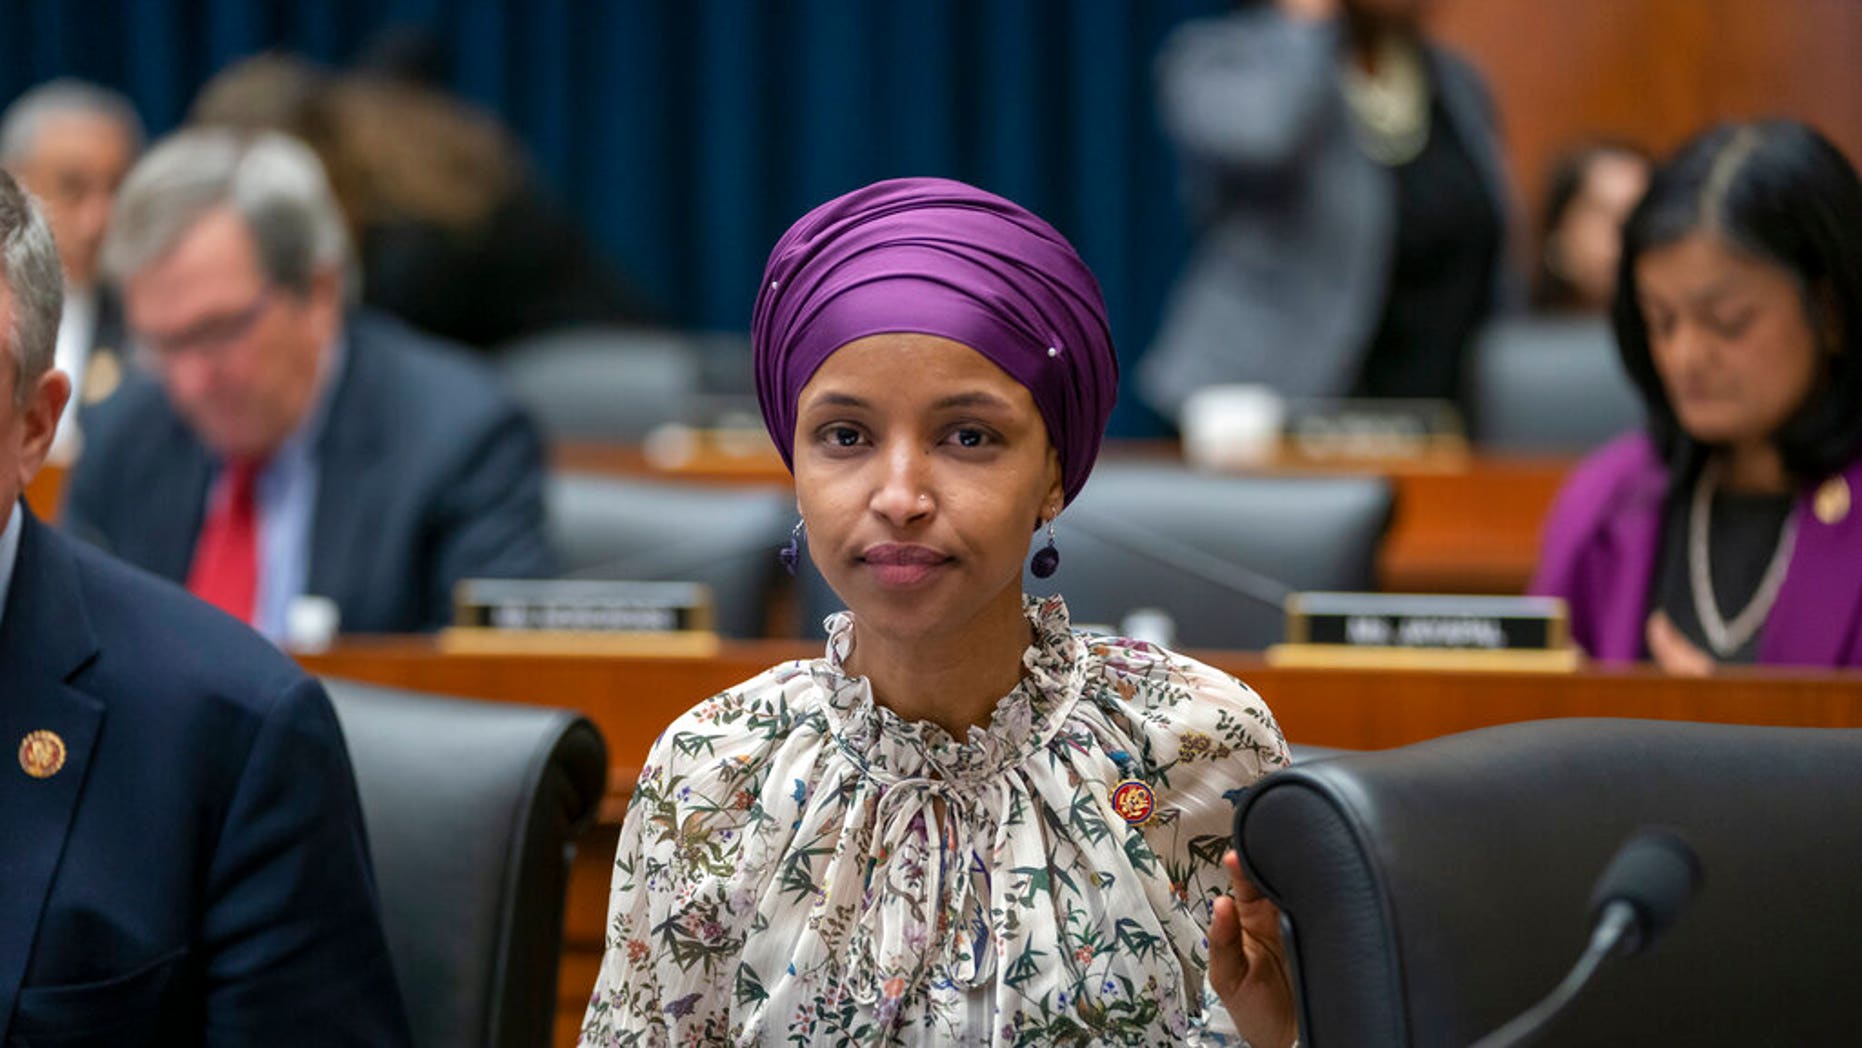 Rep. Ilhan Omar, D-Minn., sits with fellow Democrats on the House Education and Labor Committee during a bill markup, on Capitol Hill in Washington, Wednesday, March 6, 2019. (AP Photo/J. Scott Applewhite)